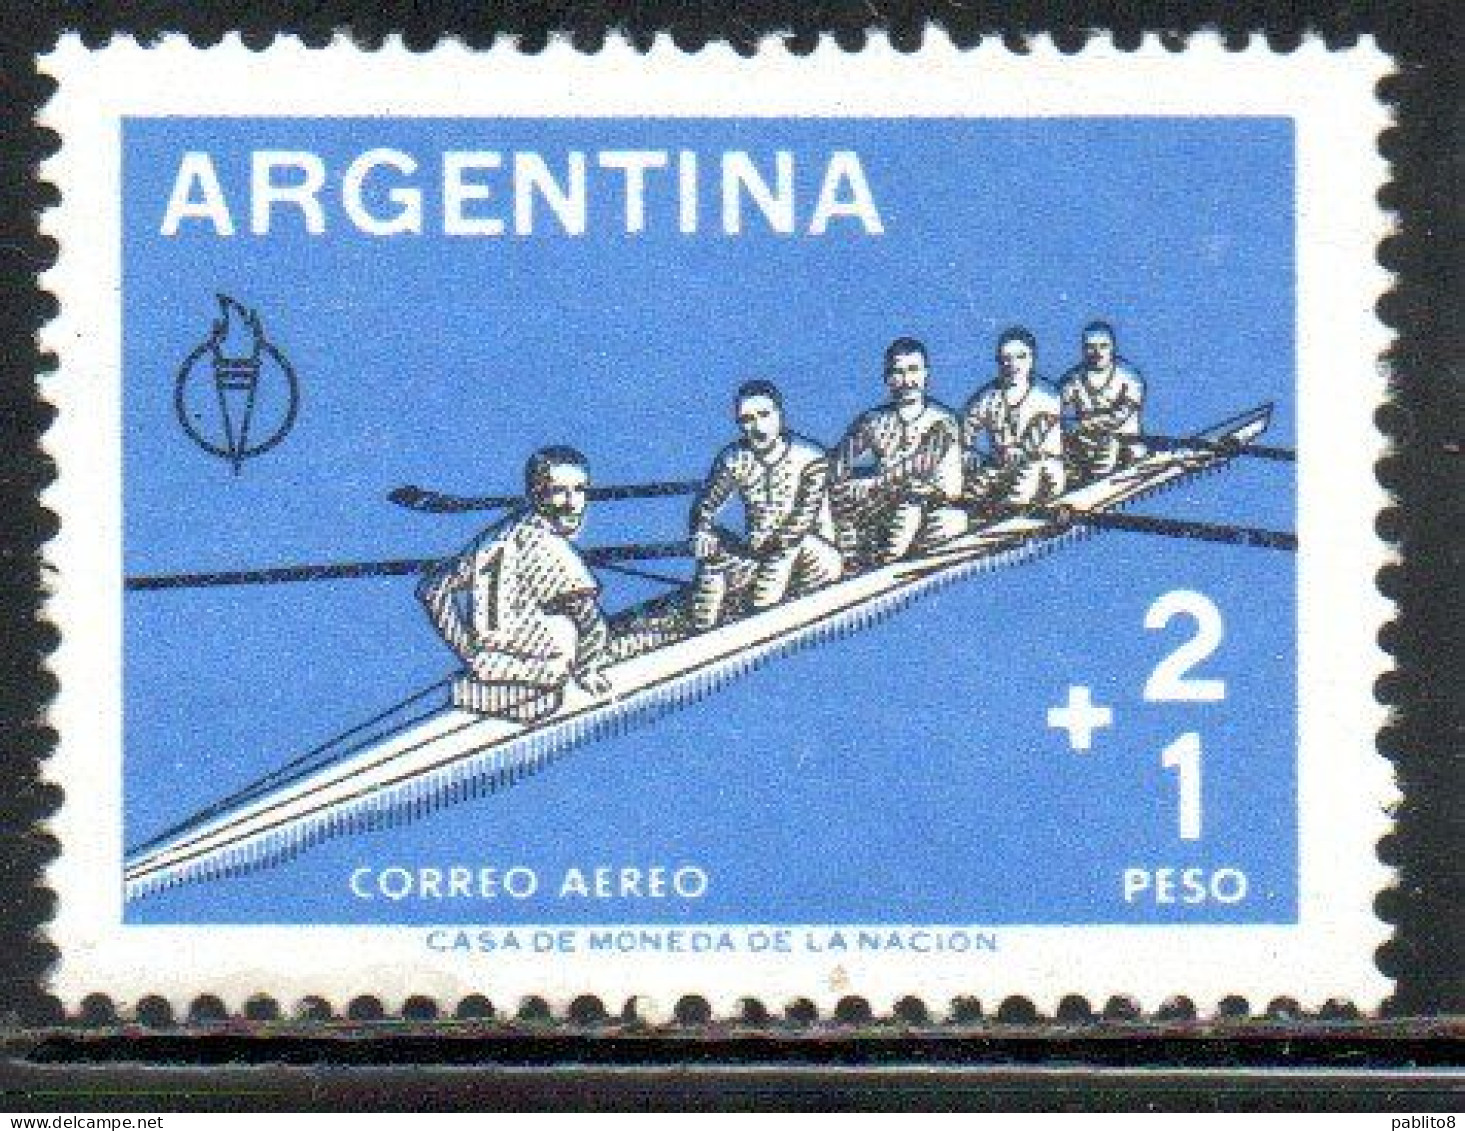 ARGENTINA 1959 AIR POST MAIL AIRMAIL CORREO AEREO ATHLETICS ROWING 2p + 1p MNH - Poste Aérienne